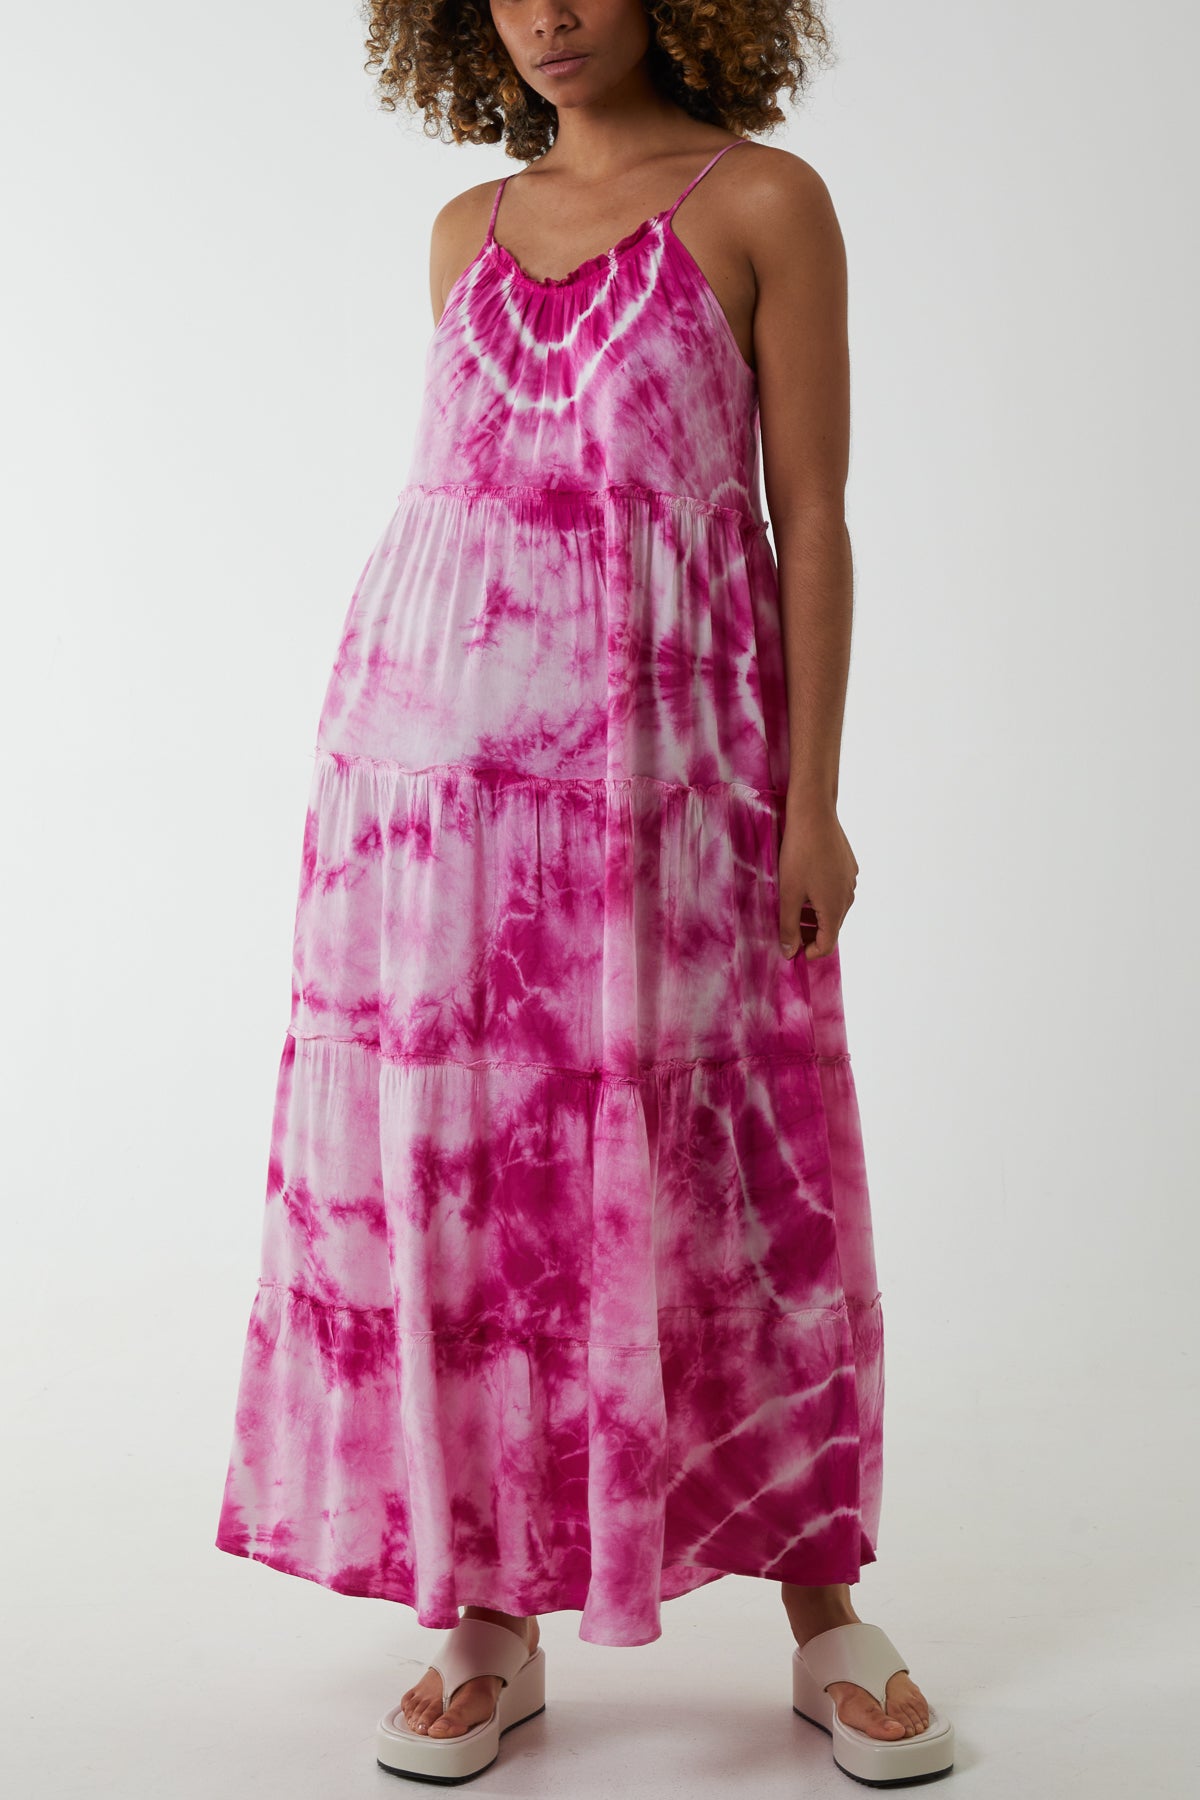 Dress, Ruched Strappy Tie-Dye Summer Maxi Dress